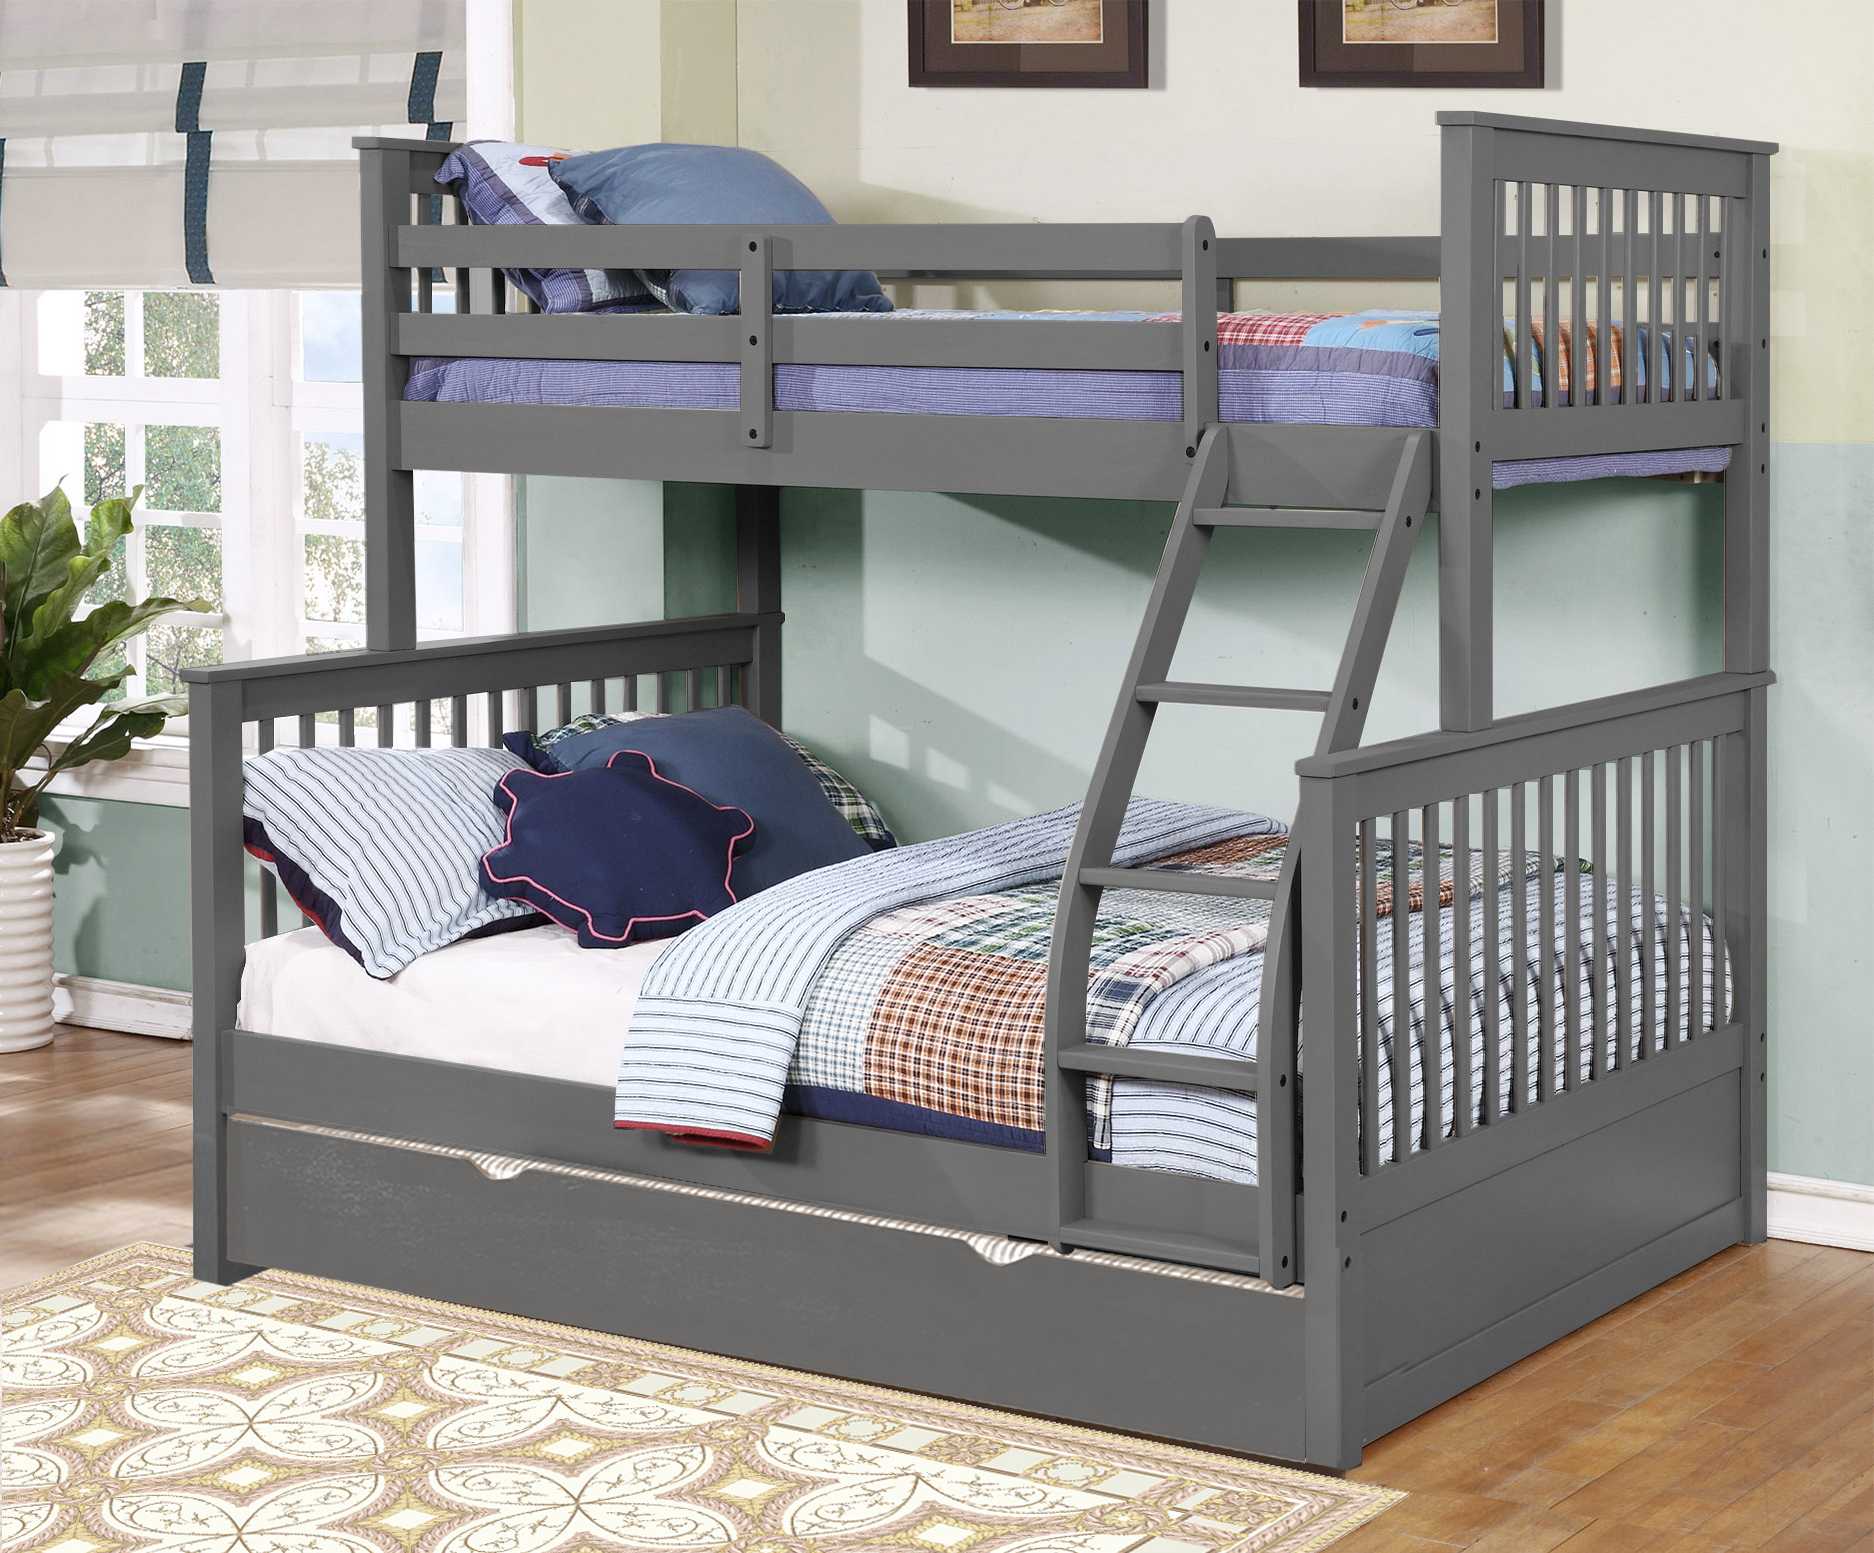 80.5" X 41.5-57.5" X 70.25" Grey Manufactured Wood and Solid Wood Twin or Full Bunk Bed with Matching Trundle